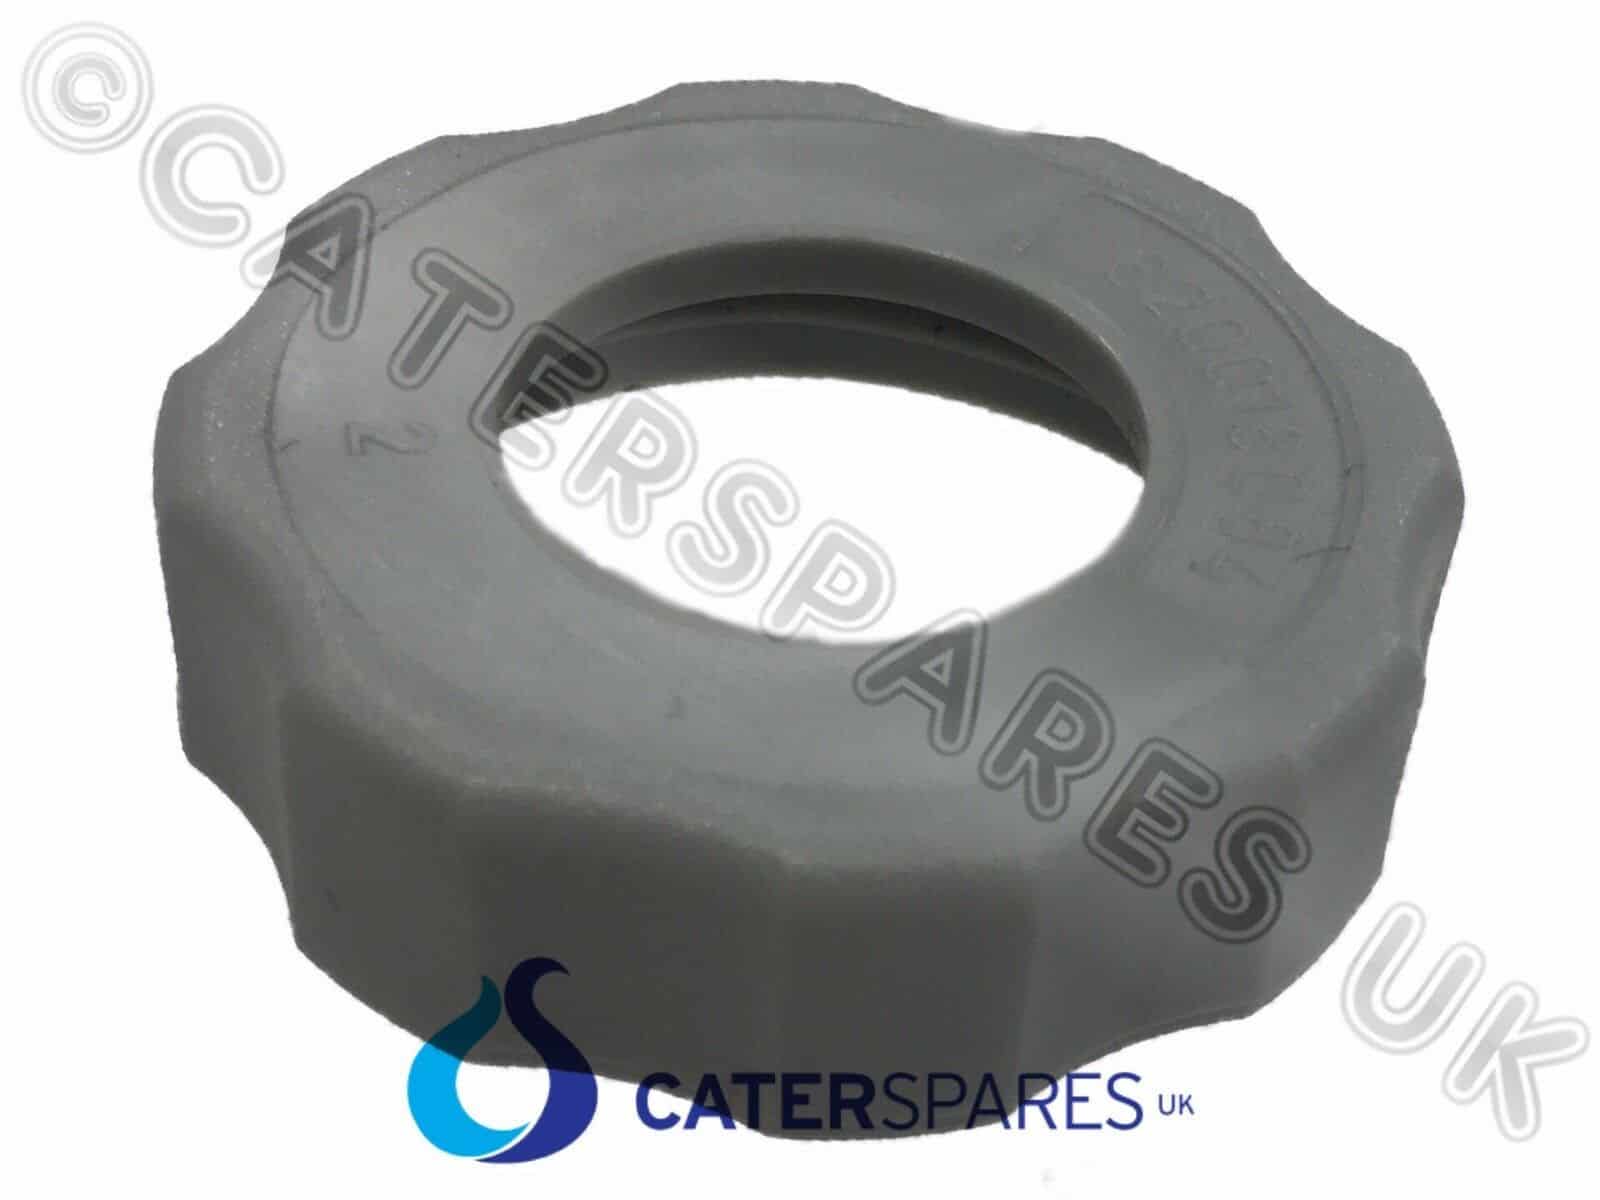 62001174 PLASTIC COUPLING NUT FOR RINSE JETS ON DISHWASHER WINTERHALTER SPARES 